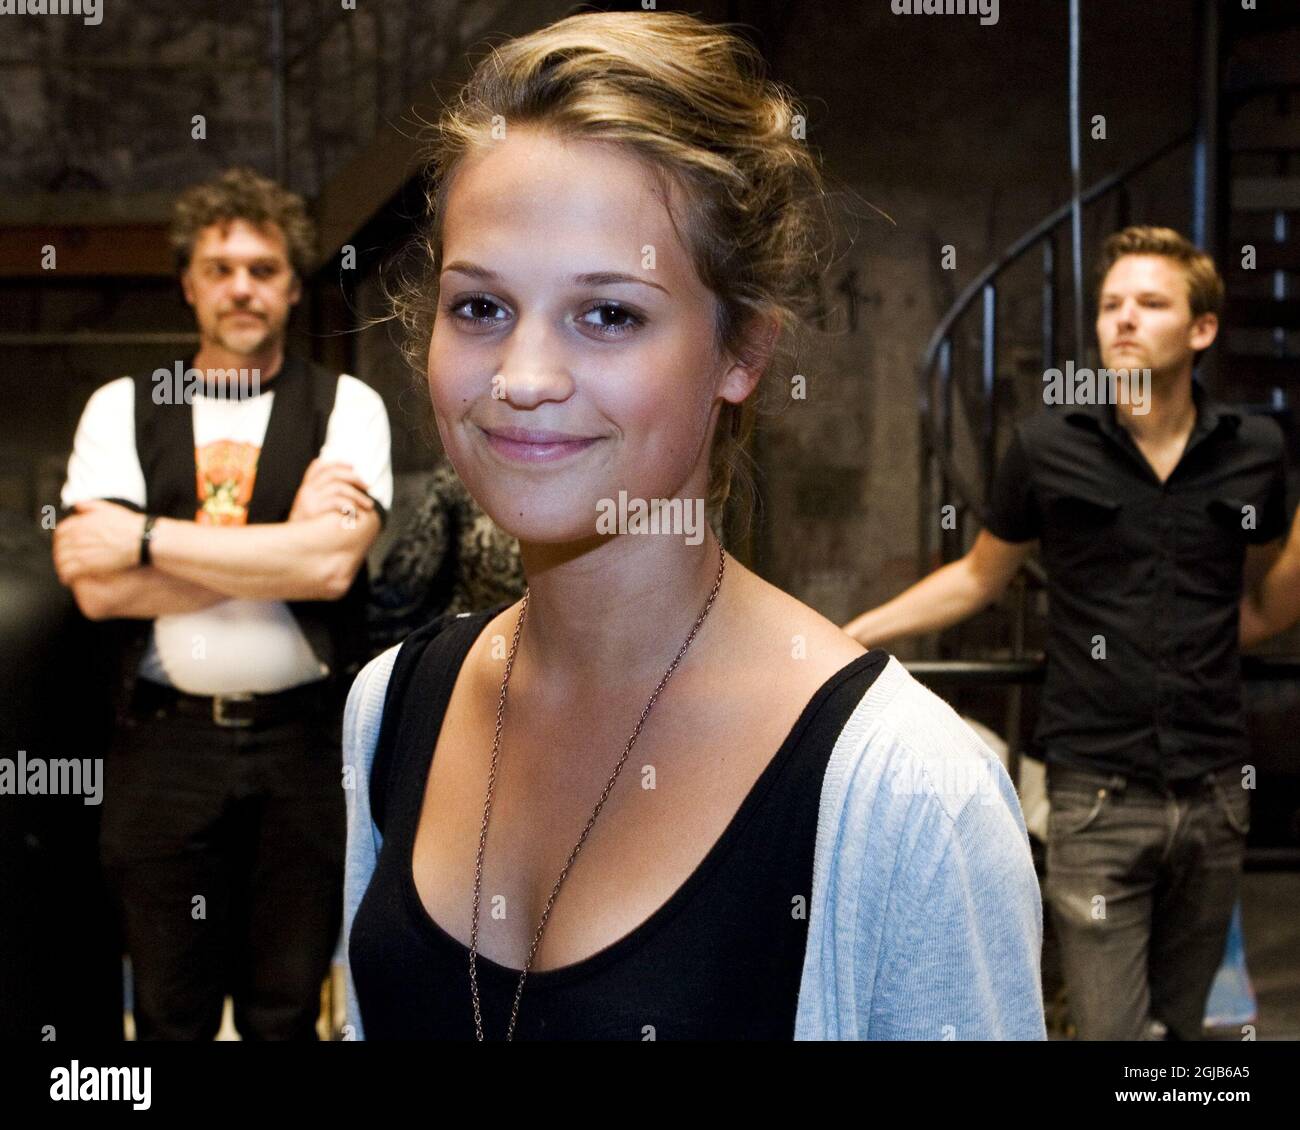 STOCKHOLM 2015-10-29 File 2007-07-17 Swedish actress Alicia Vikander is  seen when she staged in the Swedish TV series - Andra Avenyn- (Second  Avenue) in Gothenburg, Sweden "007. She has starred in movies